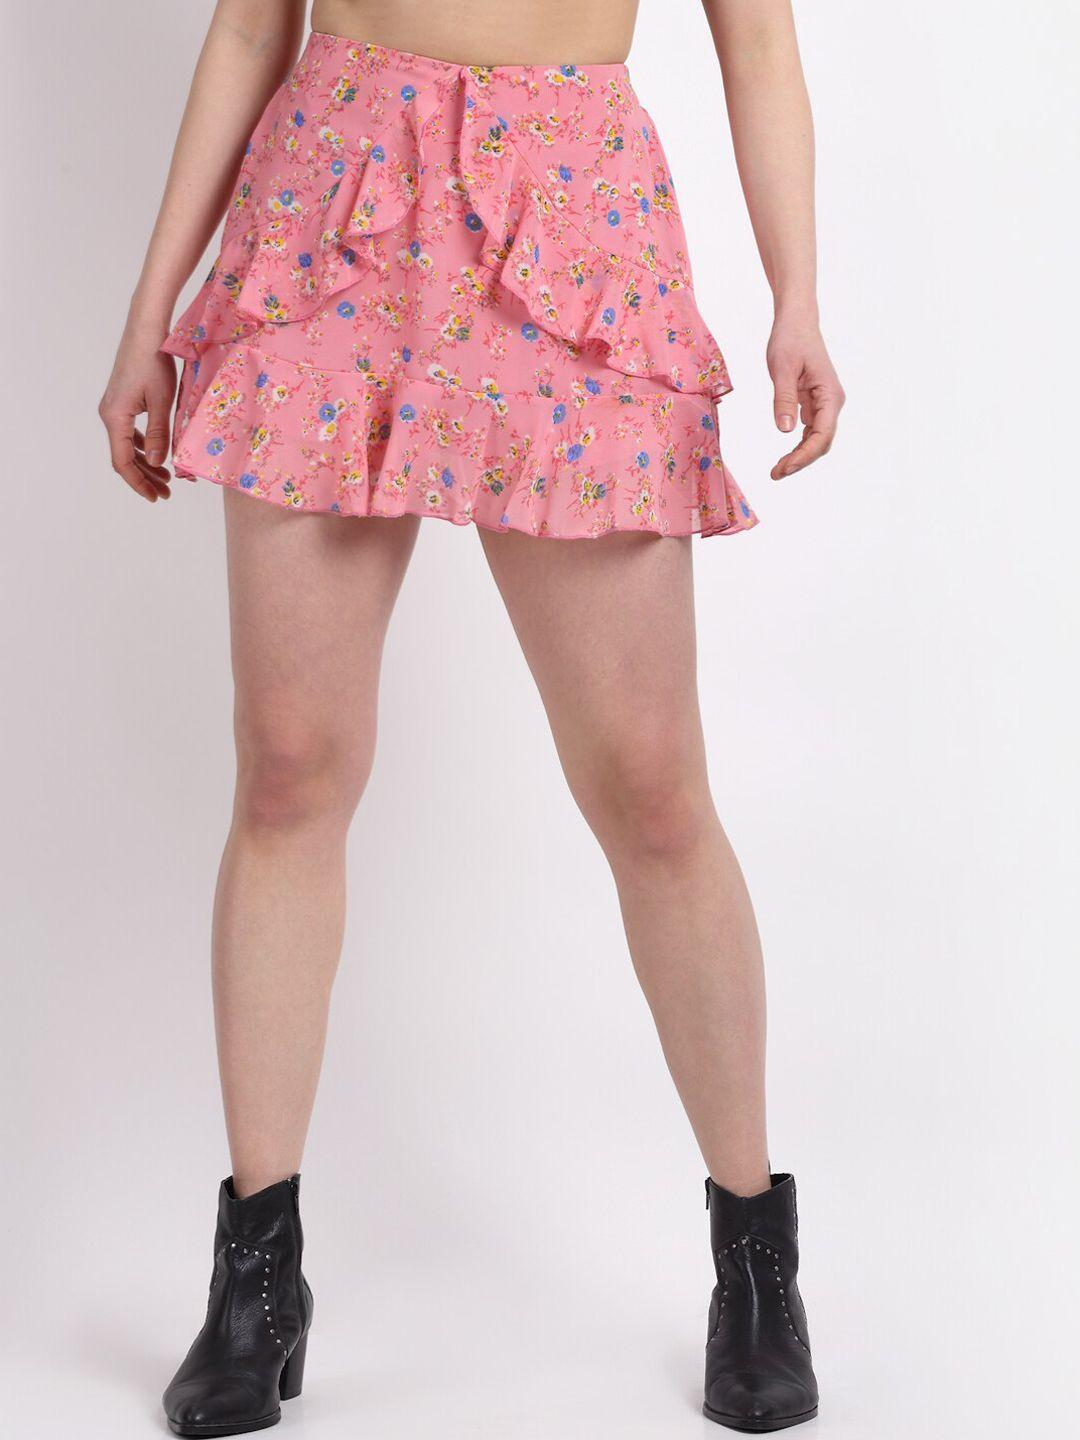 la-zoire-women-pink-printed-skirt-with-frill